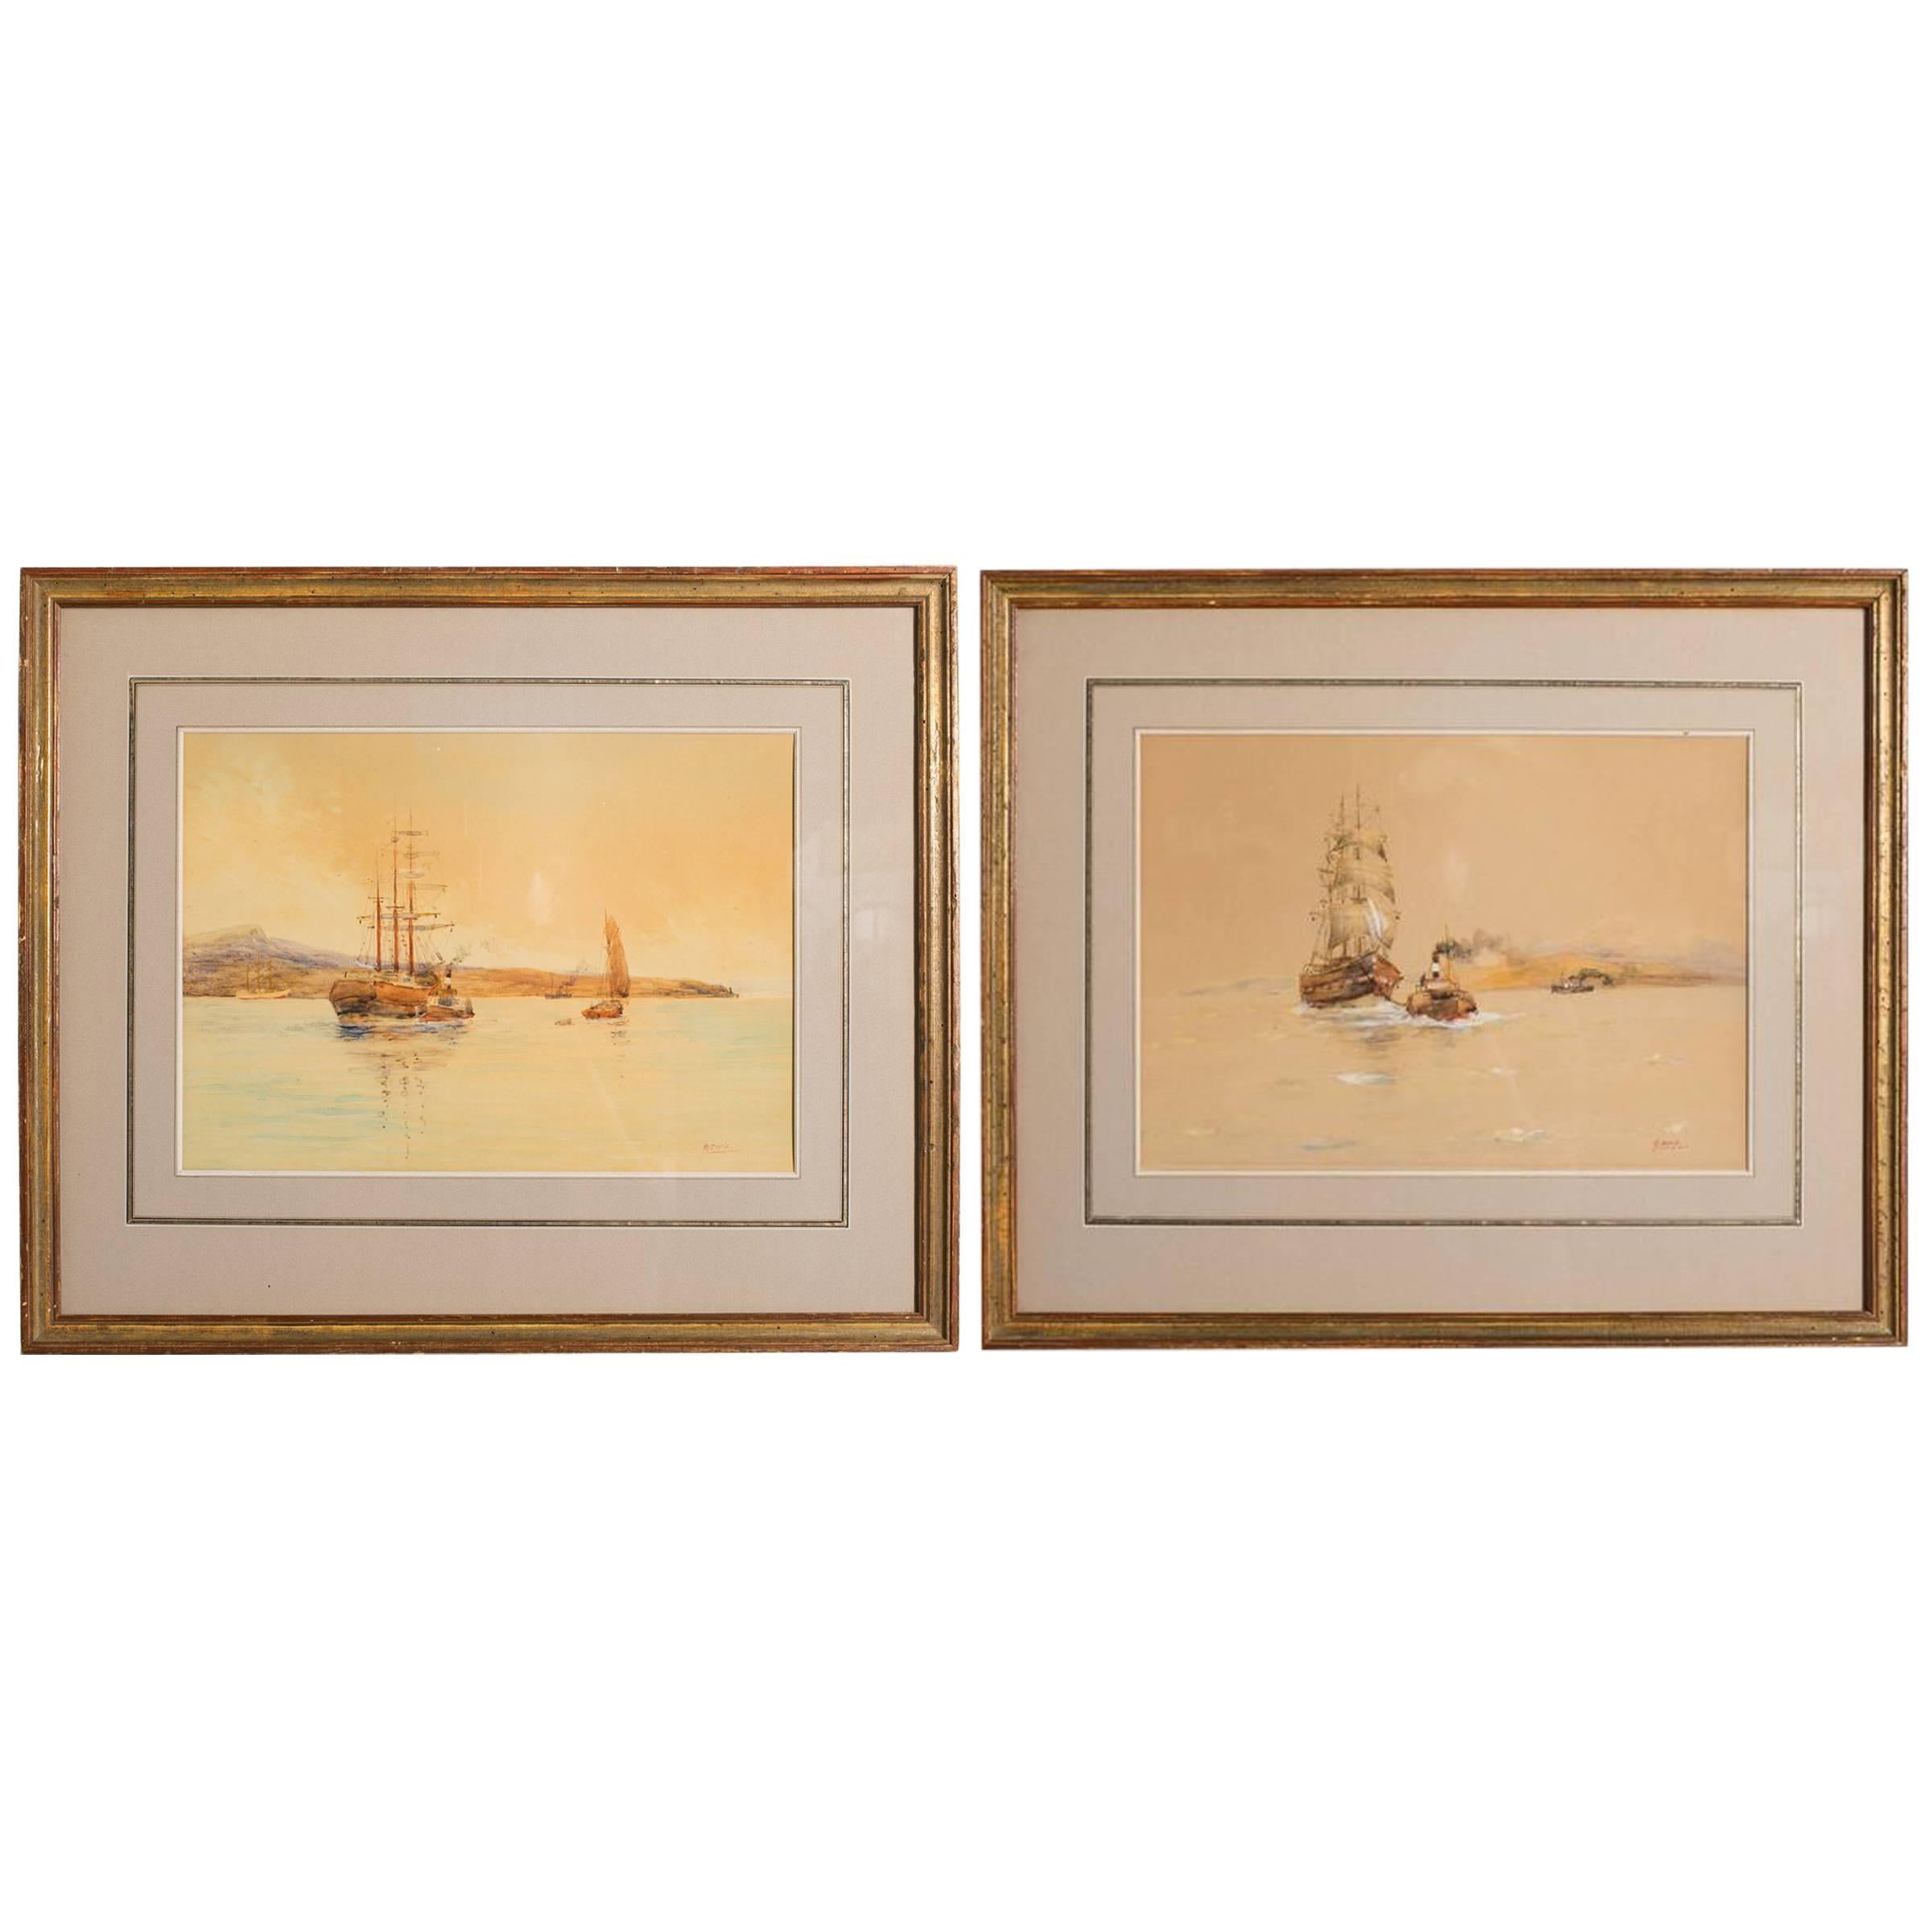 Pair of Turn of the Century Ship Watercolors Signed Davis